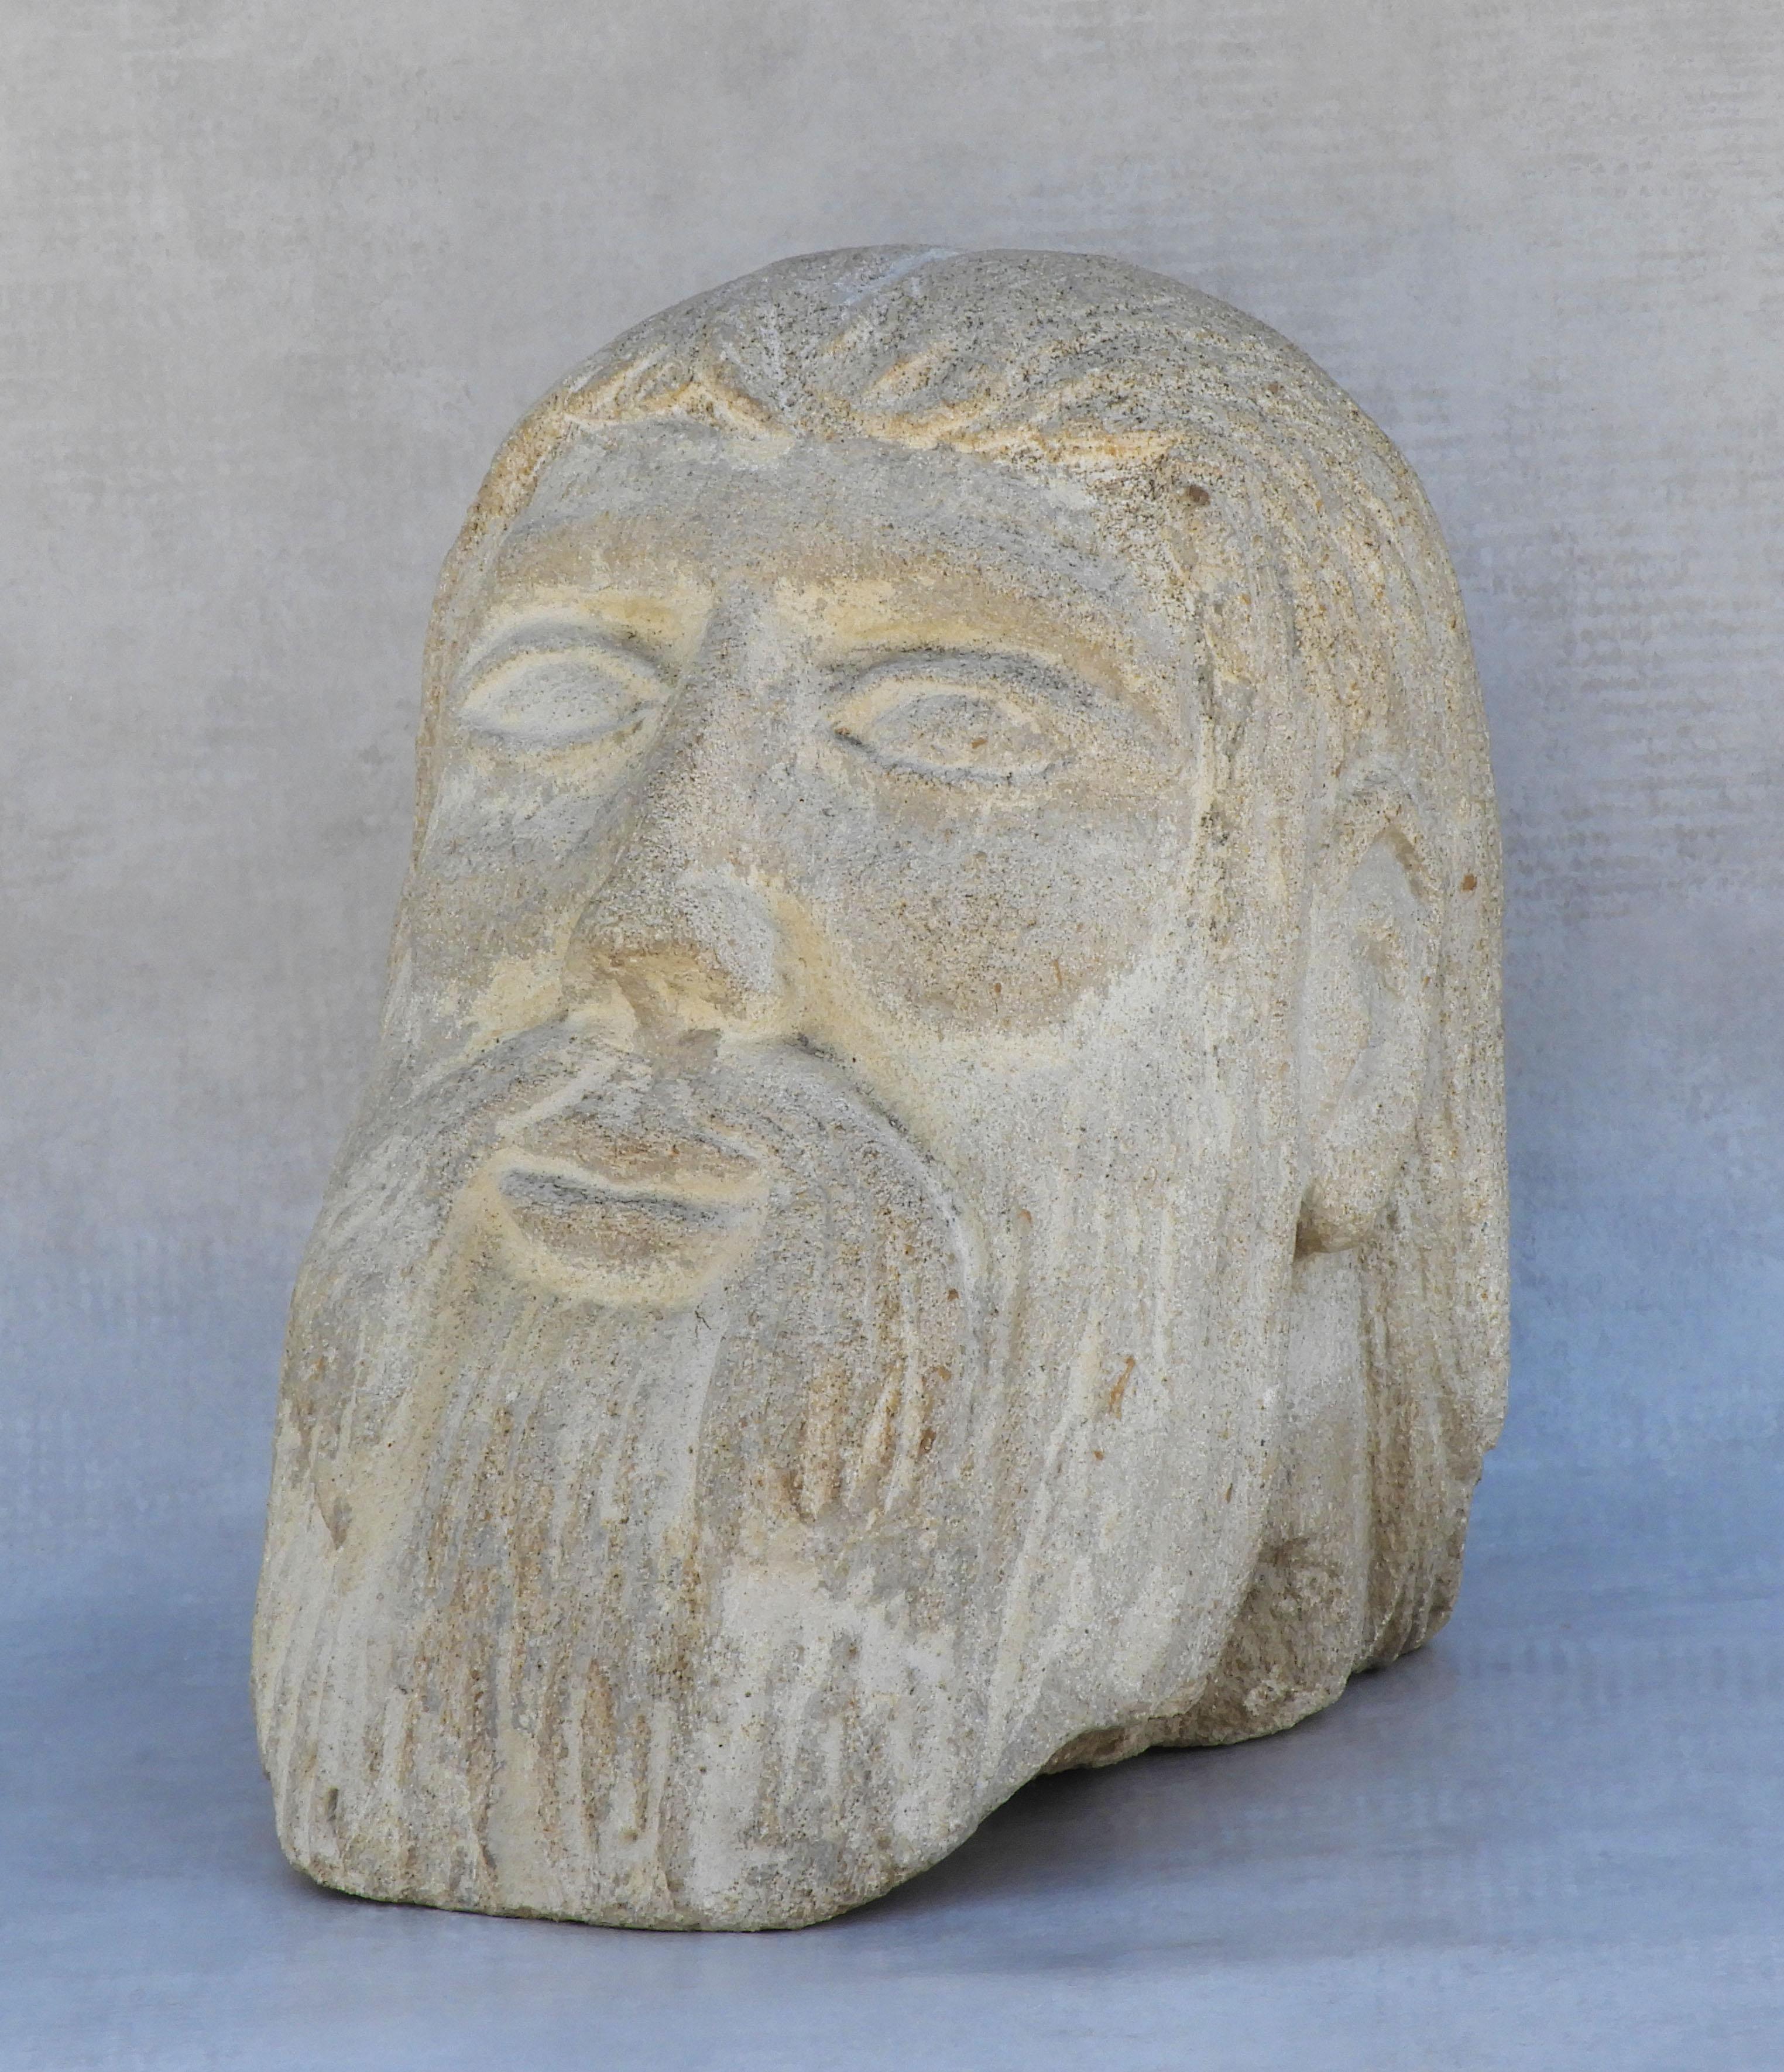 Carved stone male head sculpture 20th century Europe.

A life-size stone-carved head sculpture of a bearded man by an unknown artist.

Well executed with nice detailing and a good patina.

Great decorative piece.